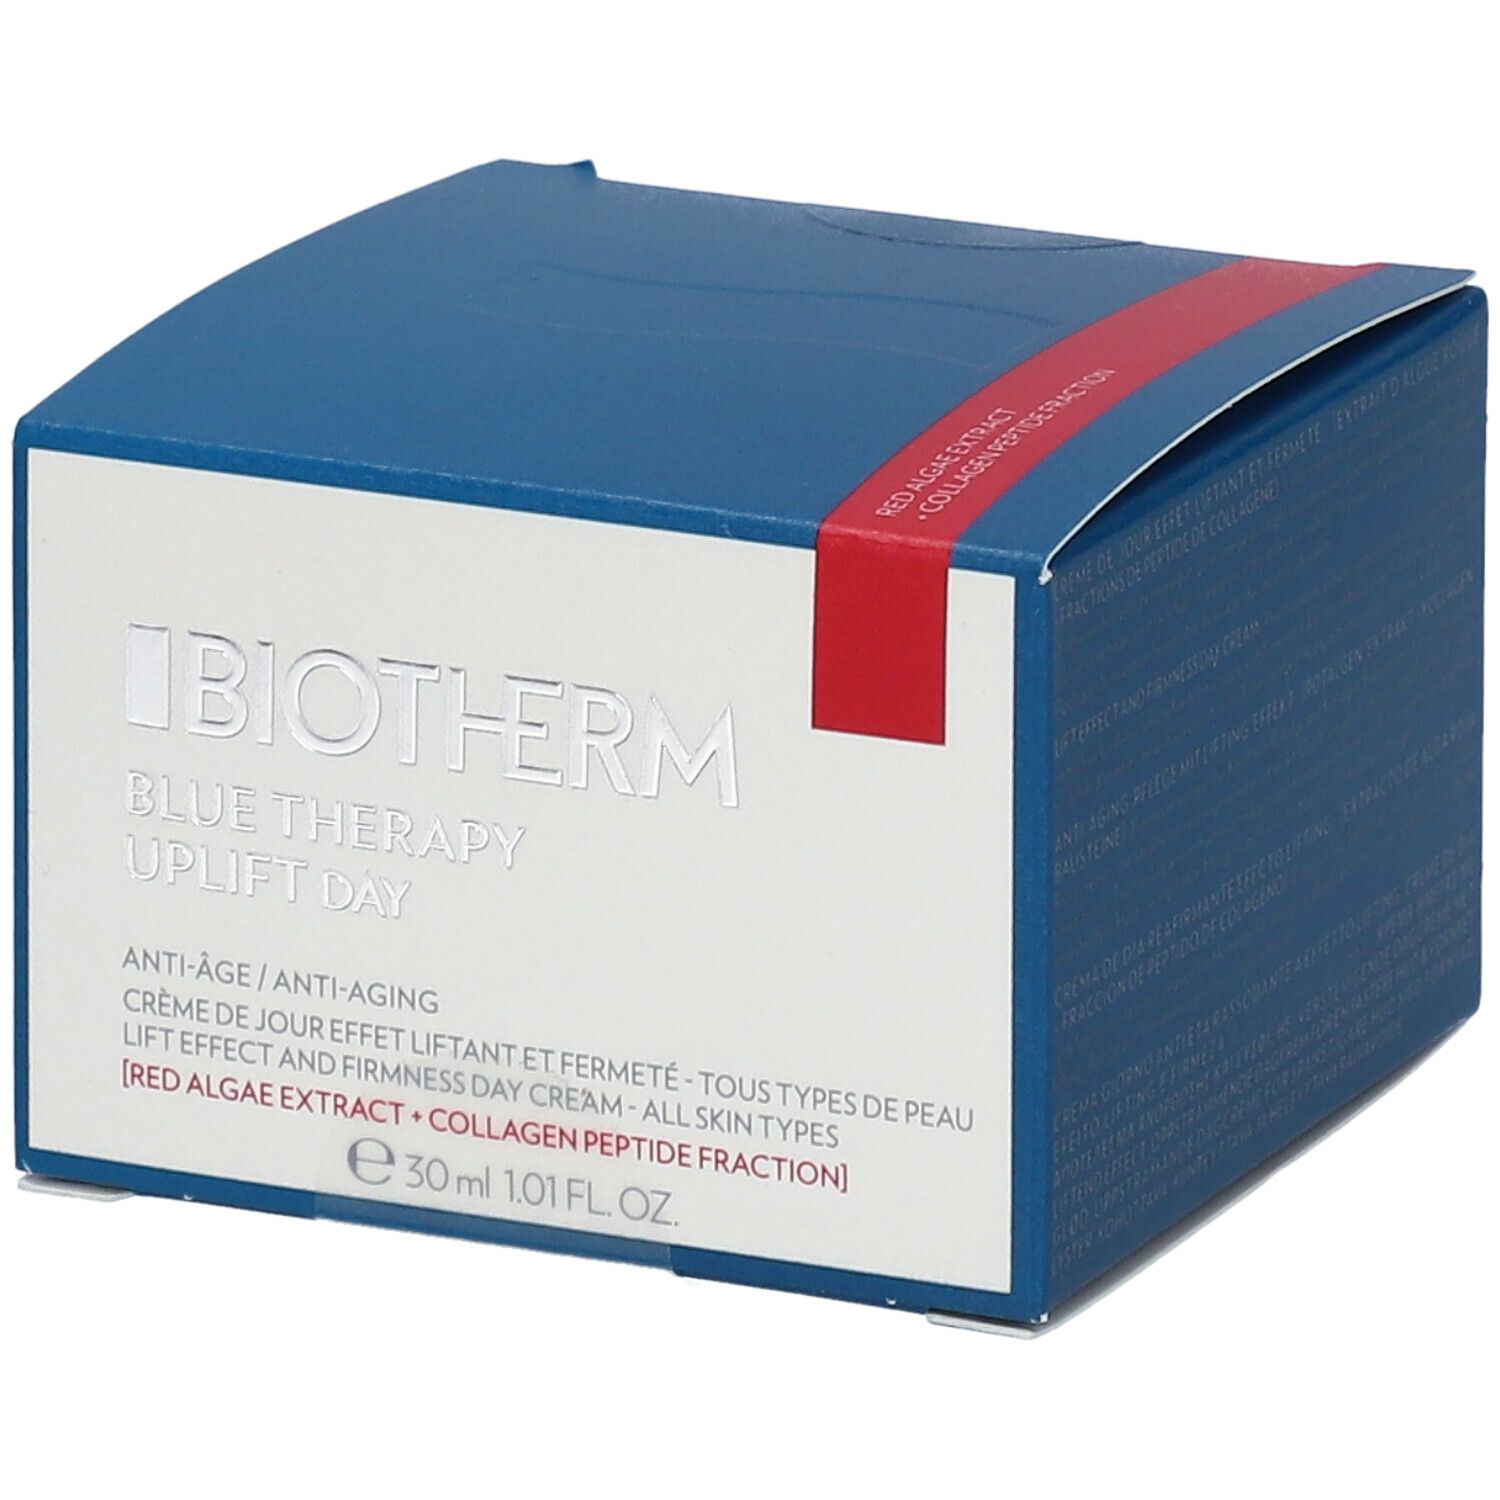 BIOTHERM BLUE THERAPY Red Algae Uplift Tagescreme